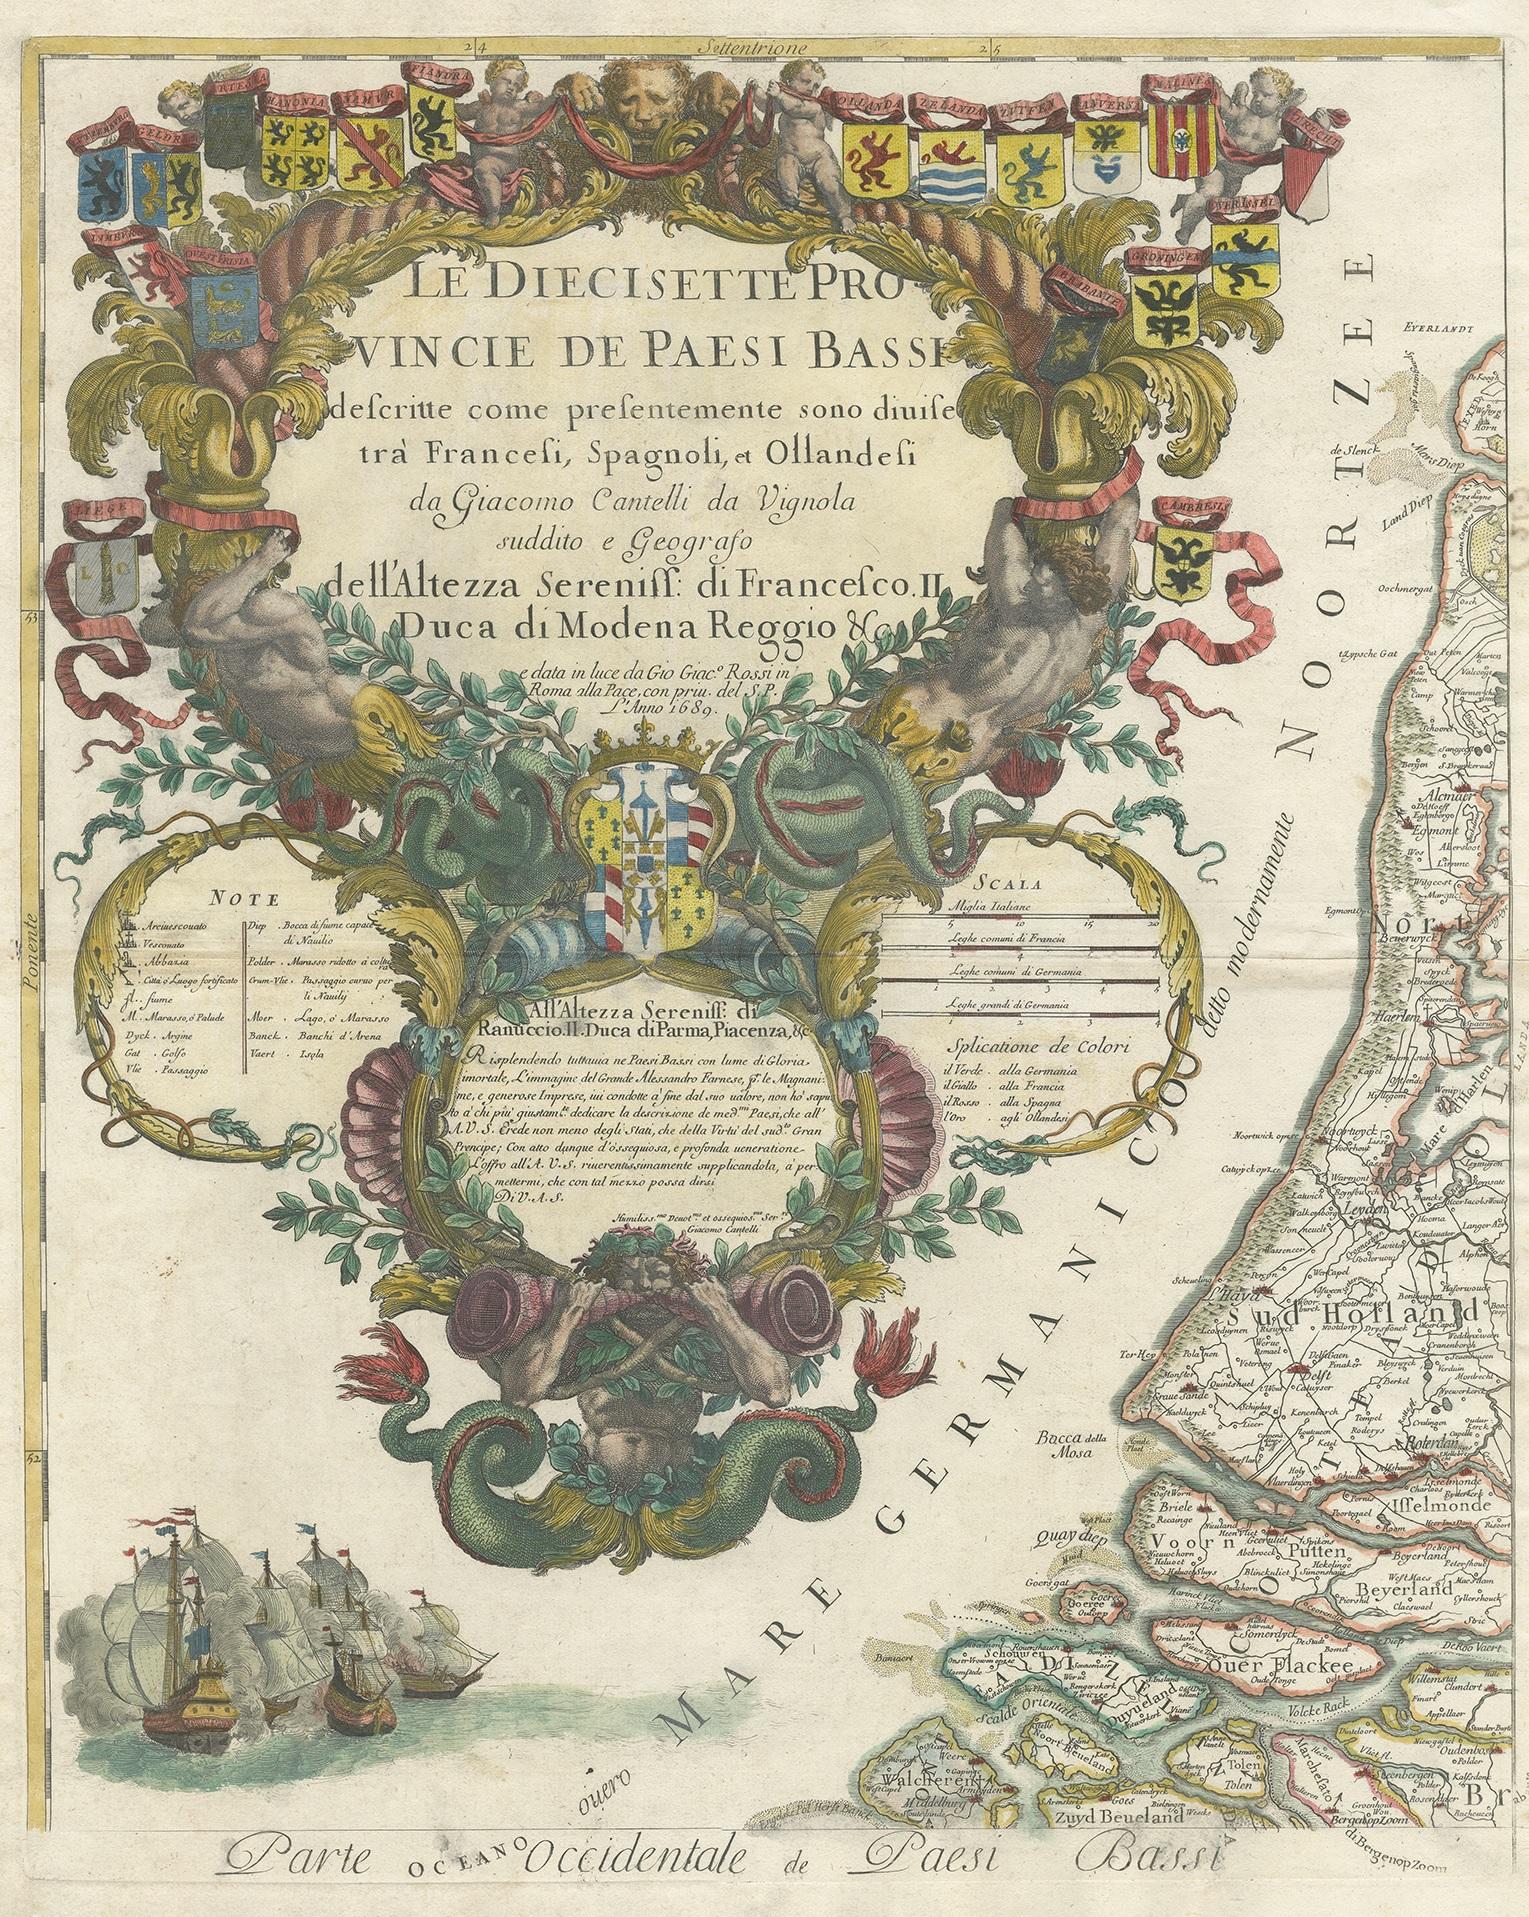 Antique map titled 'Le Diecisette Provincie de Paesi Bassi'. Part of a larger wall map of the 'Low Countries' consisting of four sheets. This specific sheet shows the large and richly decorated title cartouche and part of the Netherlands. Engraved